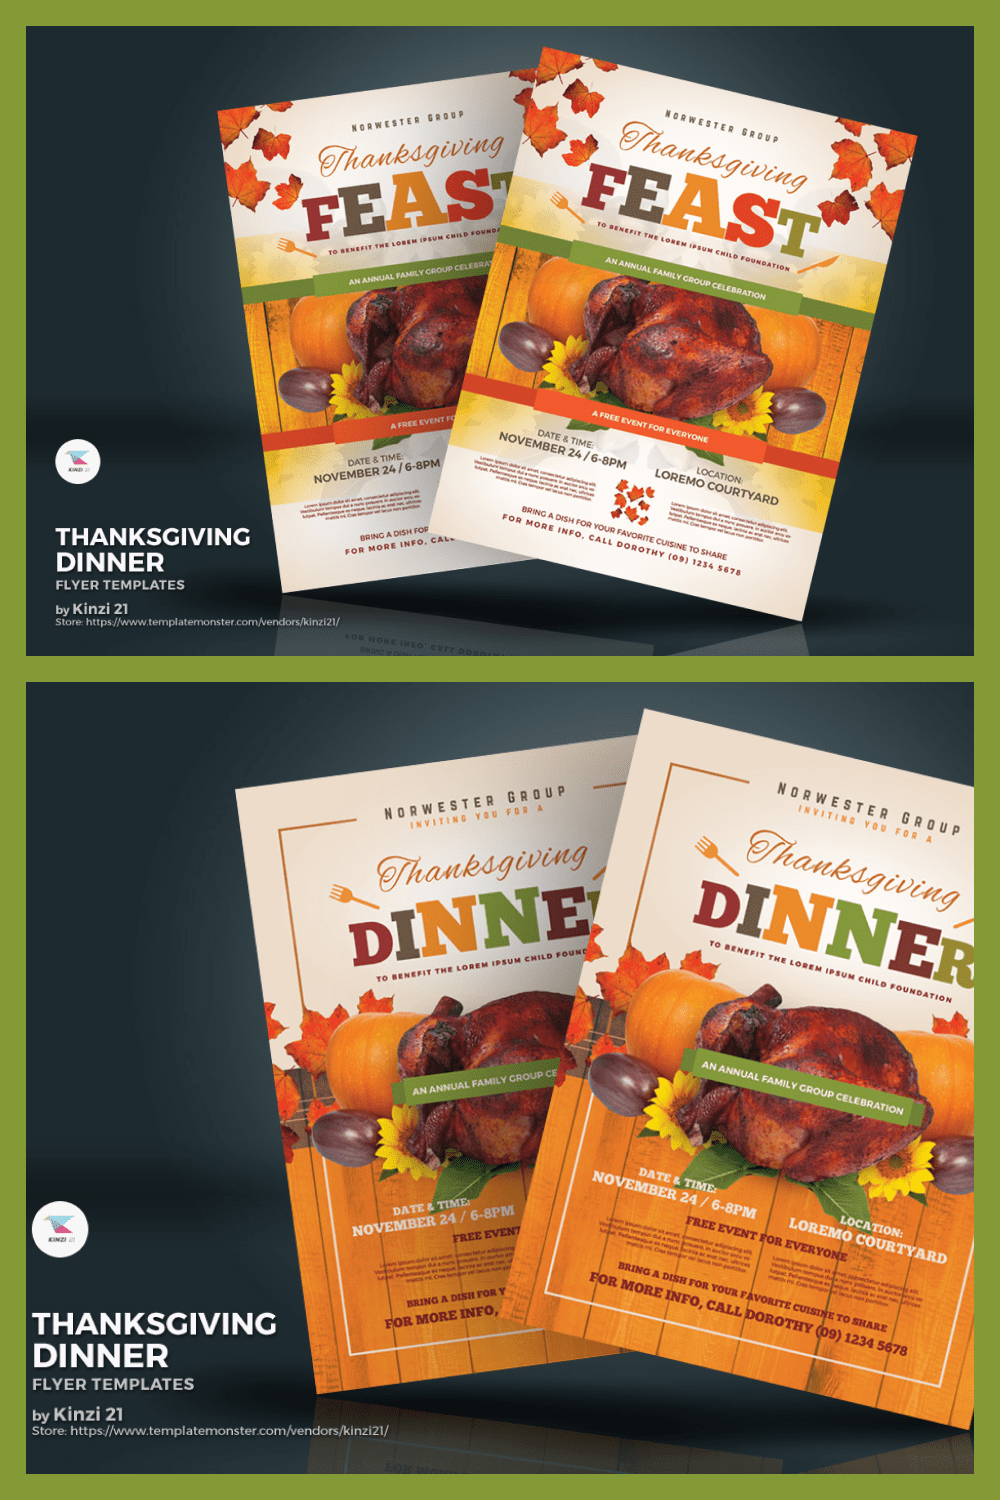 Thanksgiving dinner flyer corporate identity template.